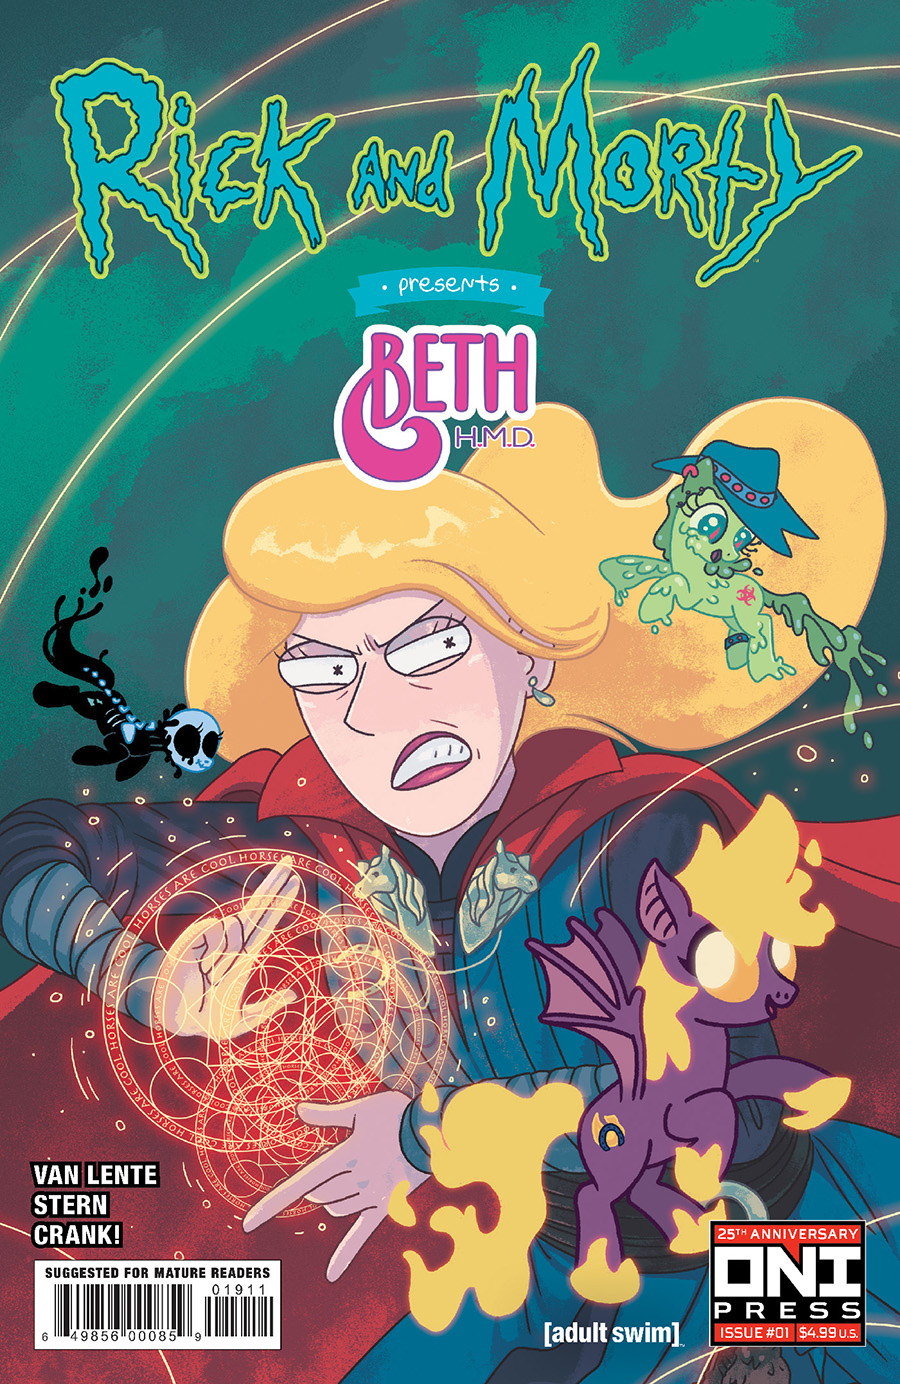 Rick And Morty Presents Beth HMD #1 Cover A Regular Sarah Stern Cover